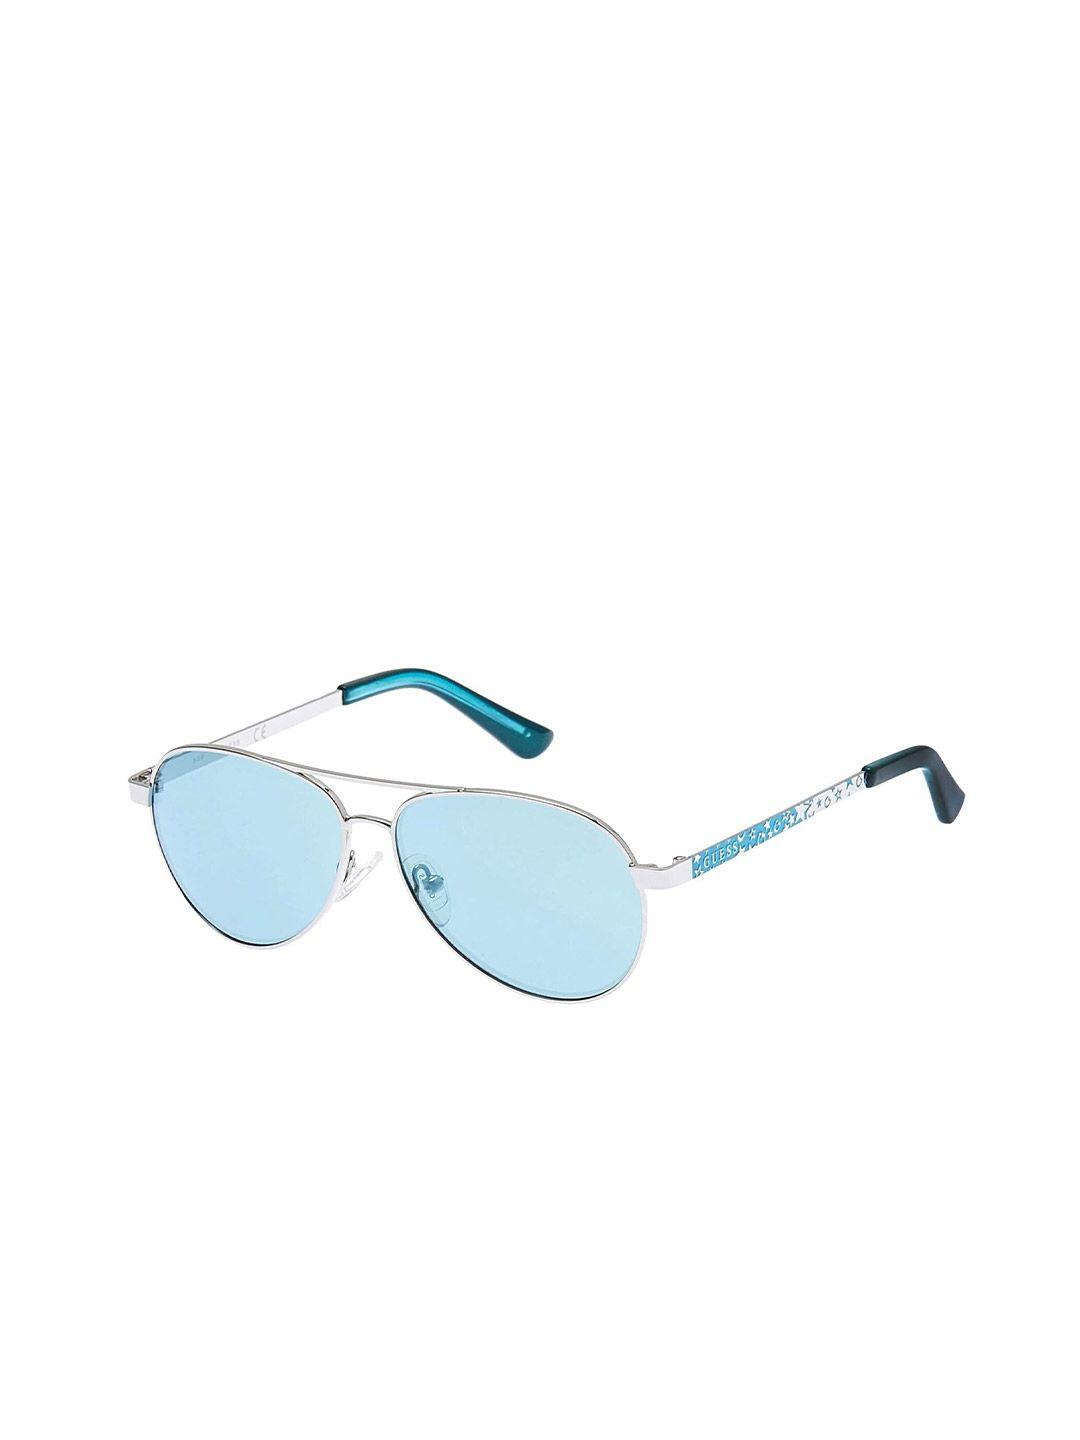 guess kids aviator sunglasses with uv protected lens gu9187 51 10x